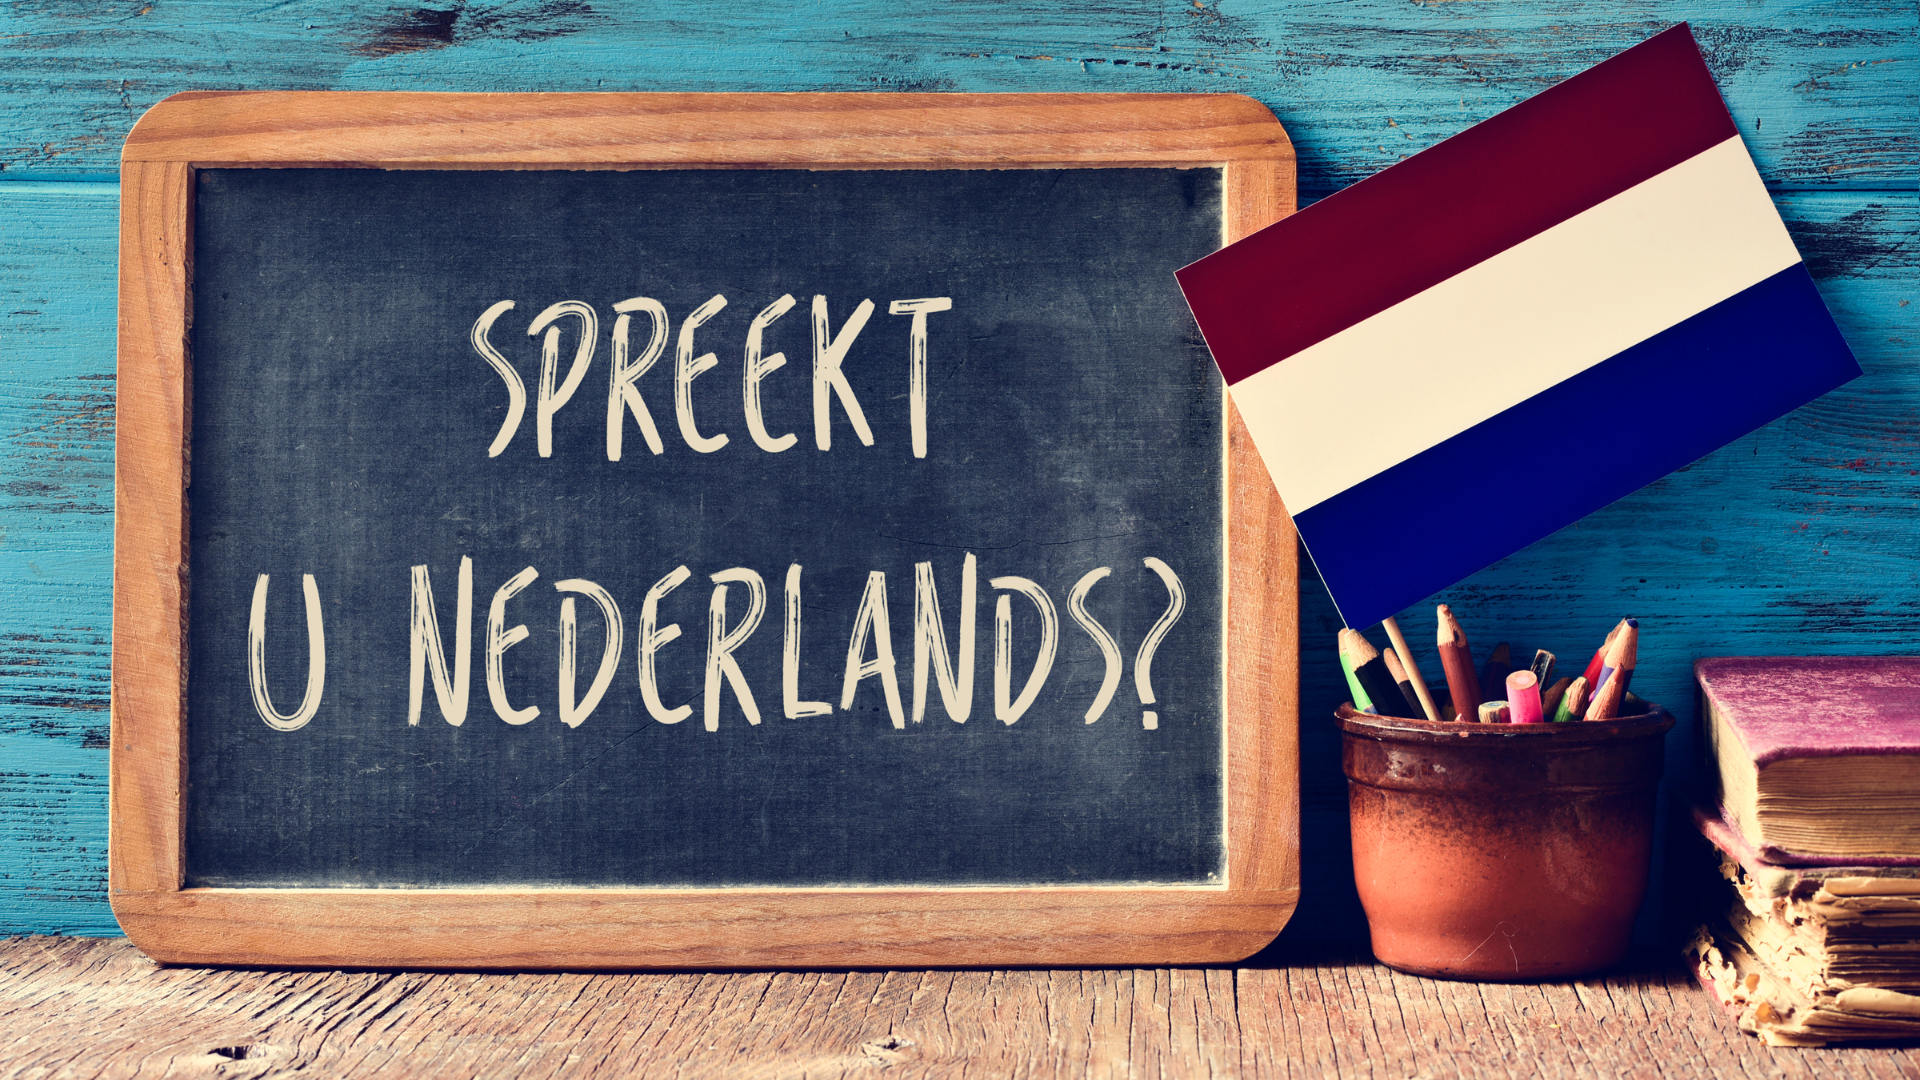 Learning Dutch in the Netherlands